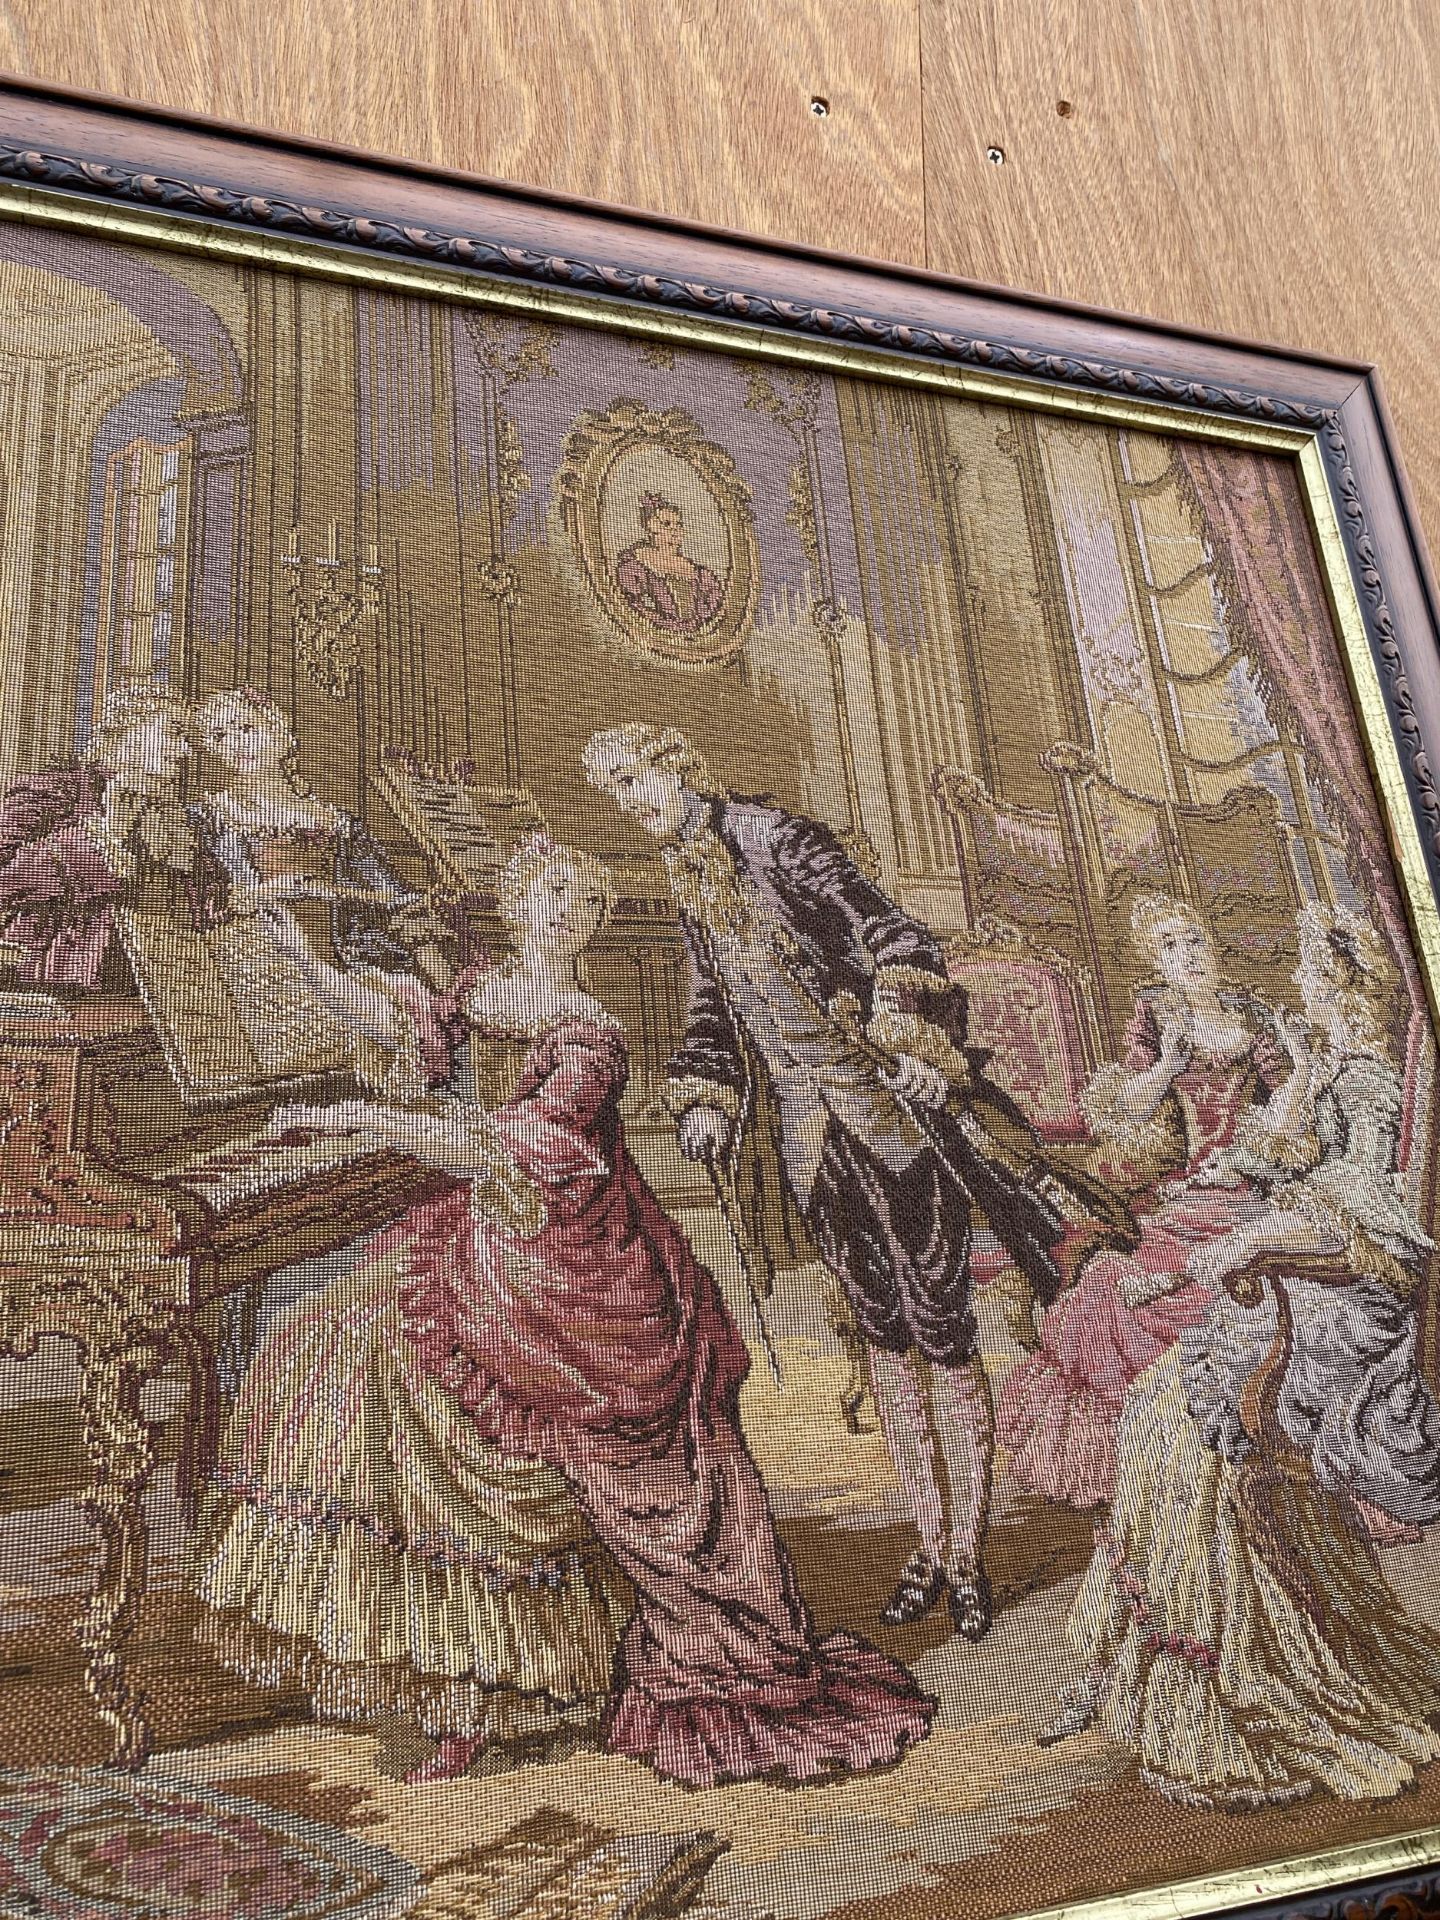 A FRAMED TAPESTRY OF A MANOR HOUSE SCENE - Image 4 of 4